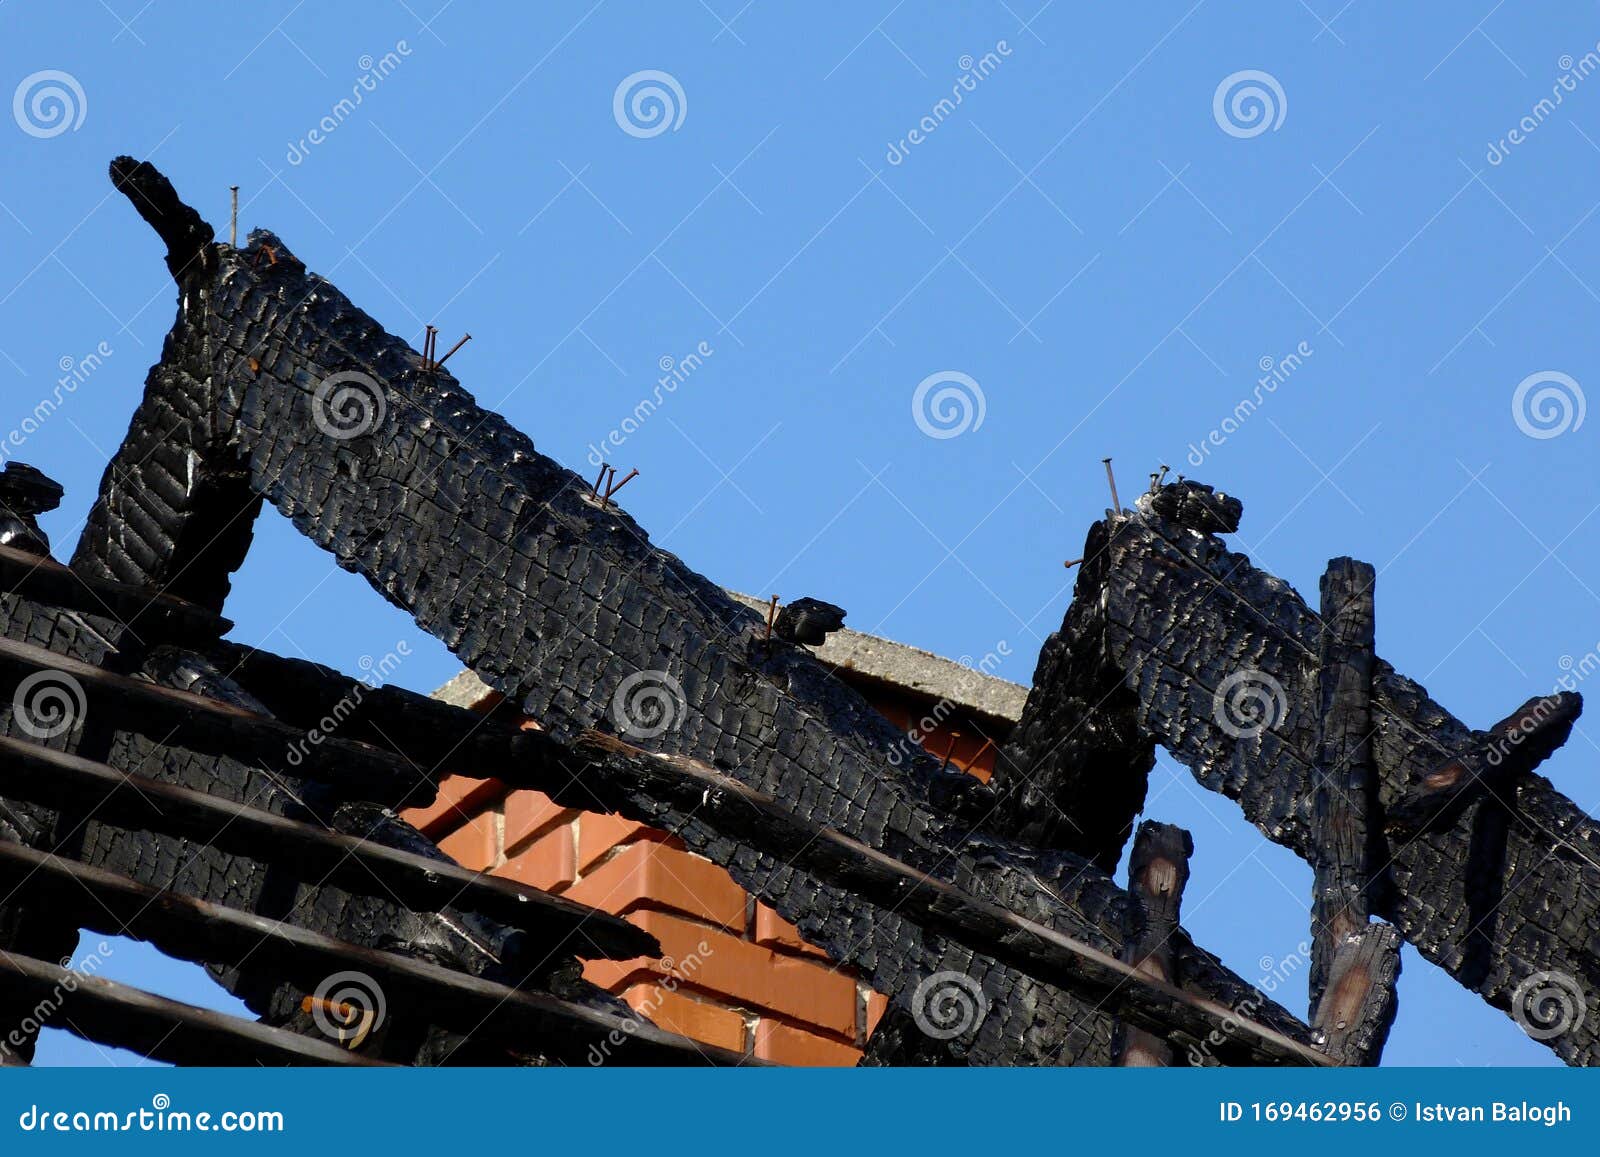 Black Charred Burnt Wooden Roof Rafters After Fire Under Blue Sky Stock Photo Image of frame